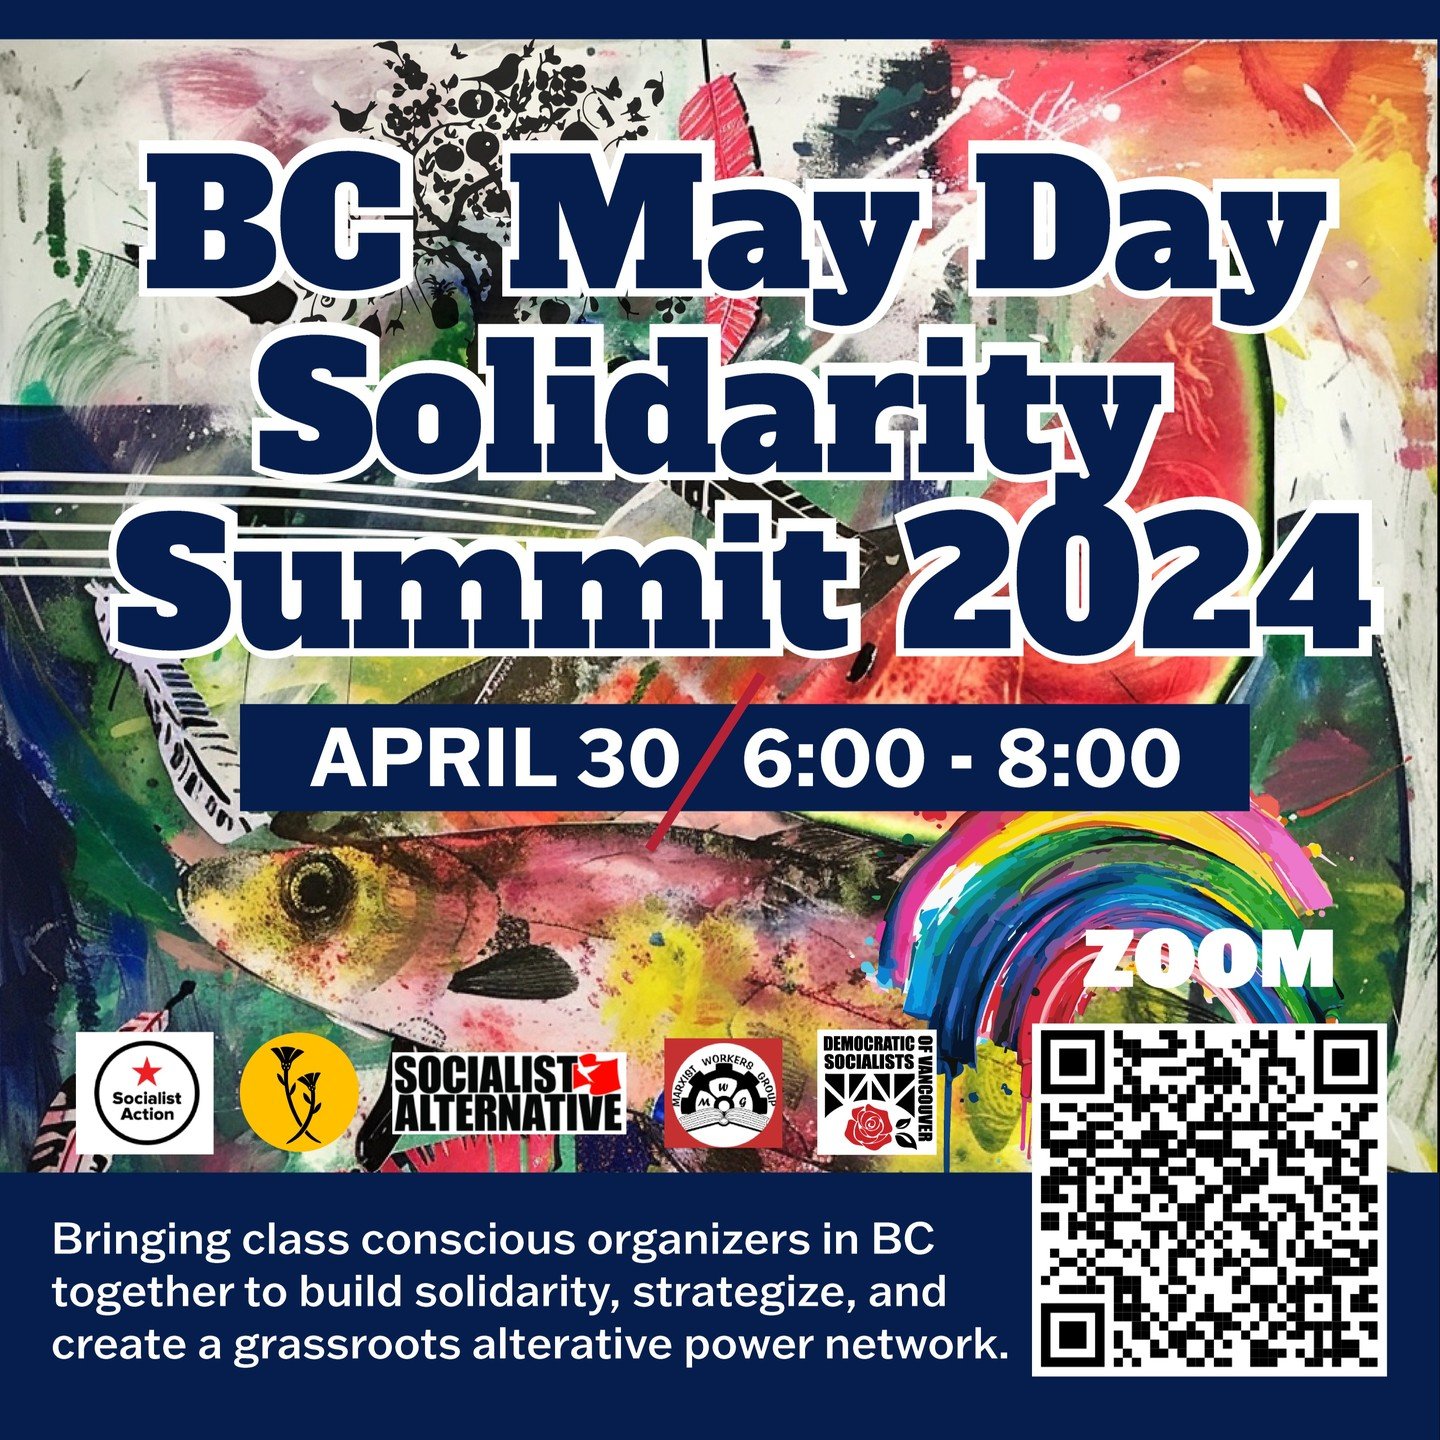 BC May Day Solidarity Summit 2024

How does Capitalism exacerbate divides between the labour movement and other social justice struggles? Join a selection of panelists and comrades for discussion on unionism and organized labour.

APRIL 30 / 6:00 - 8